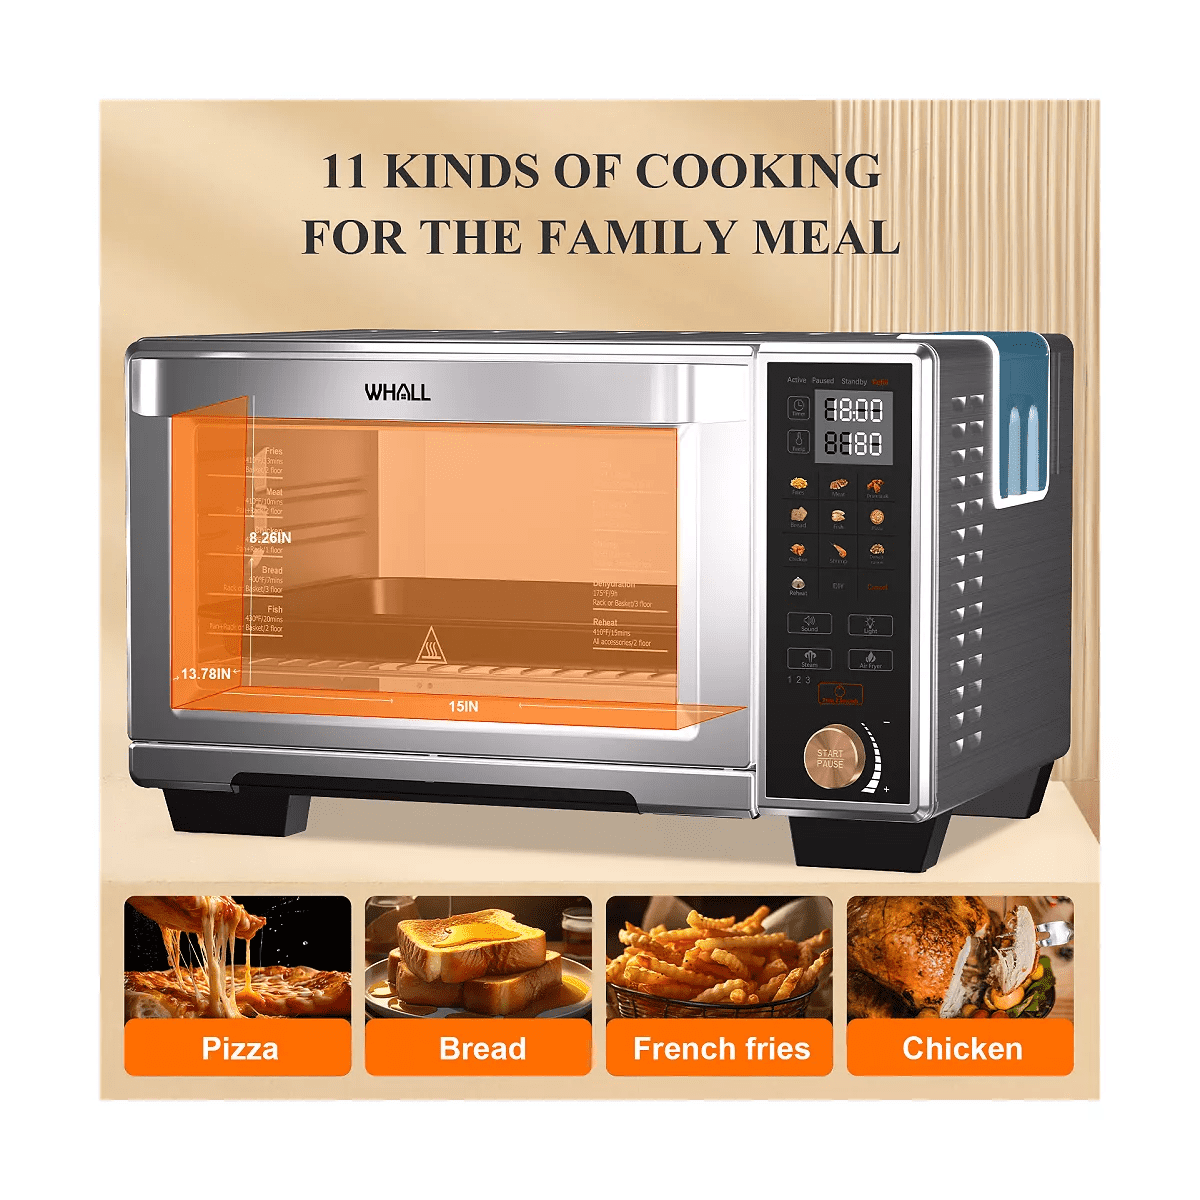 WHALL Toaster Oven Air Fryer, Max XL Large 30-Quart Smart Oven,11-in-1 Toaster  Oven Countertop with Steam Function,12-inch Pizza,6 slices of Toast, 4  Accessories Included, Stainless Steel /1700W/CS - Yahoo Shopping